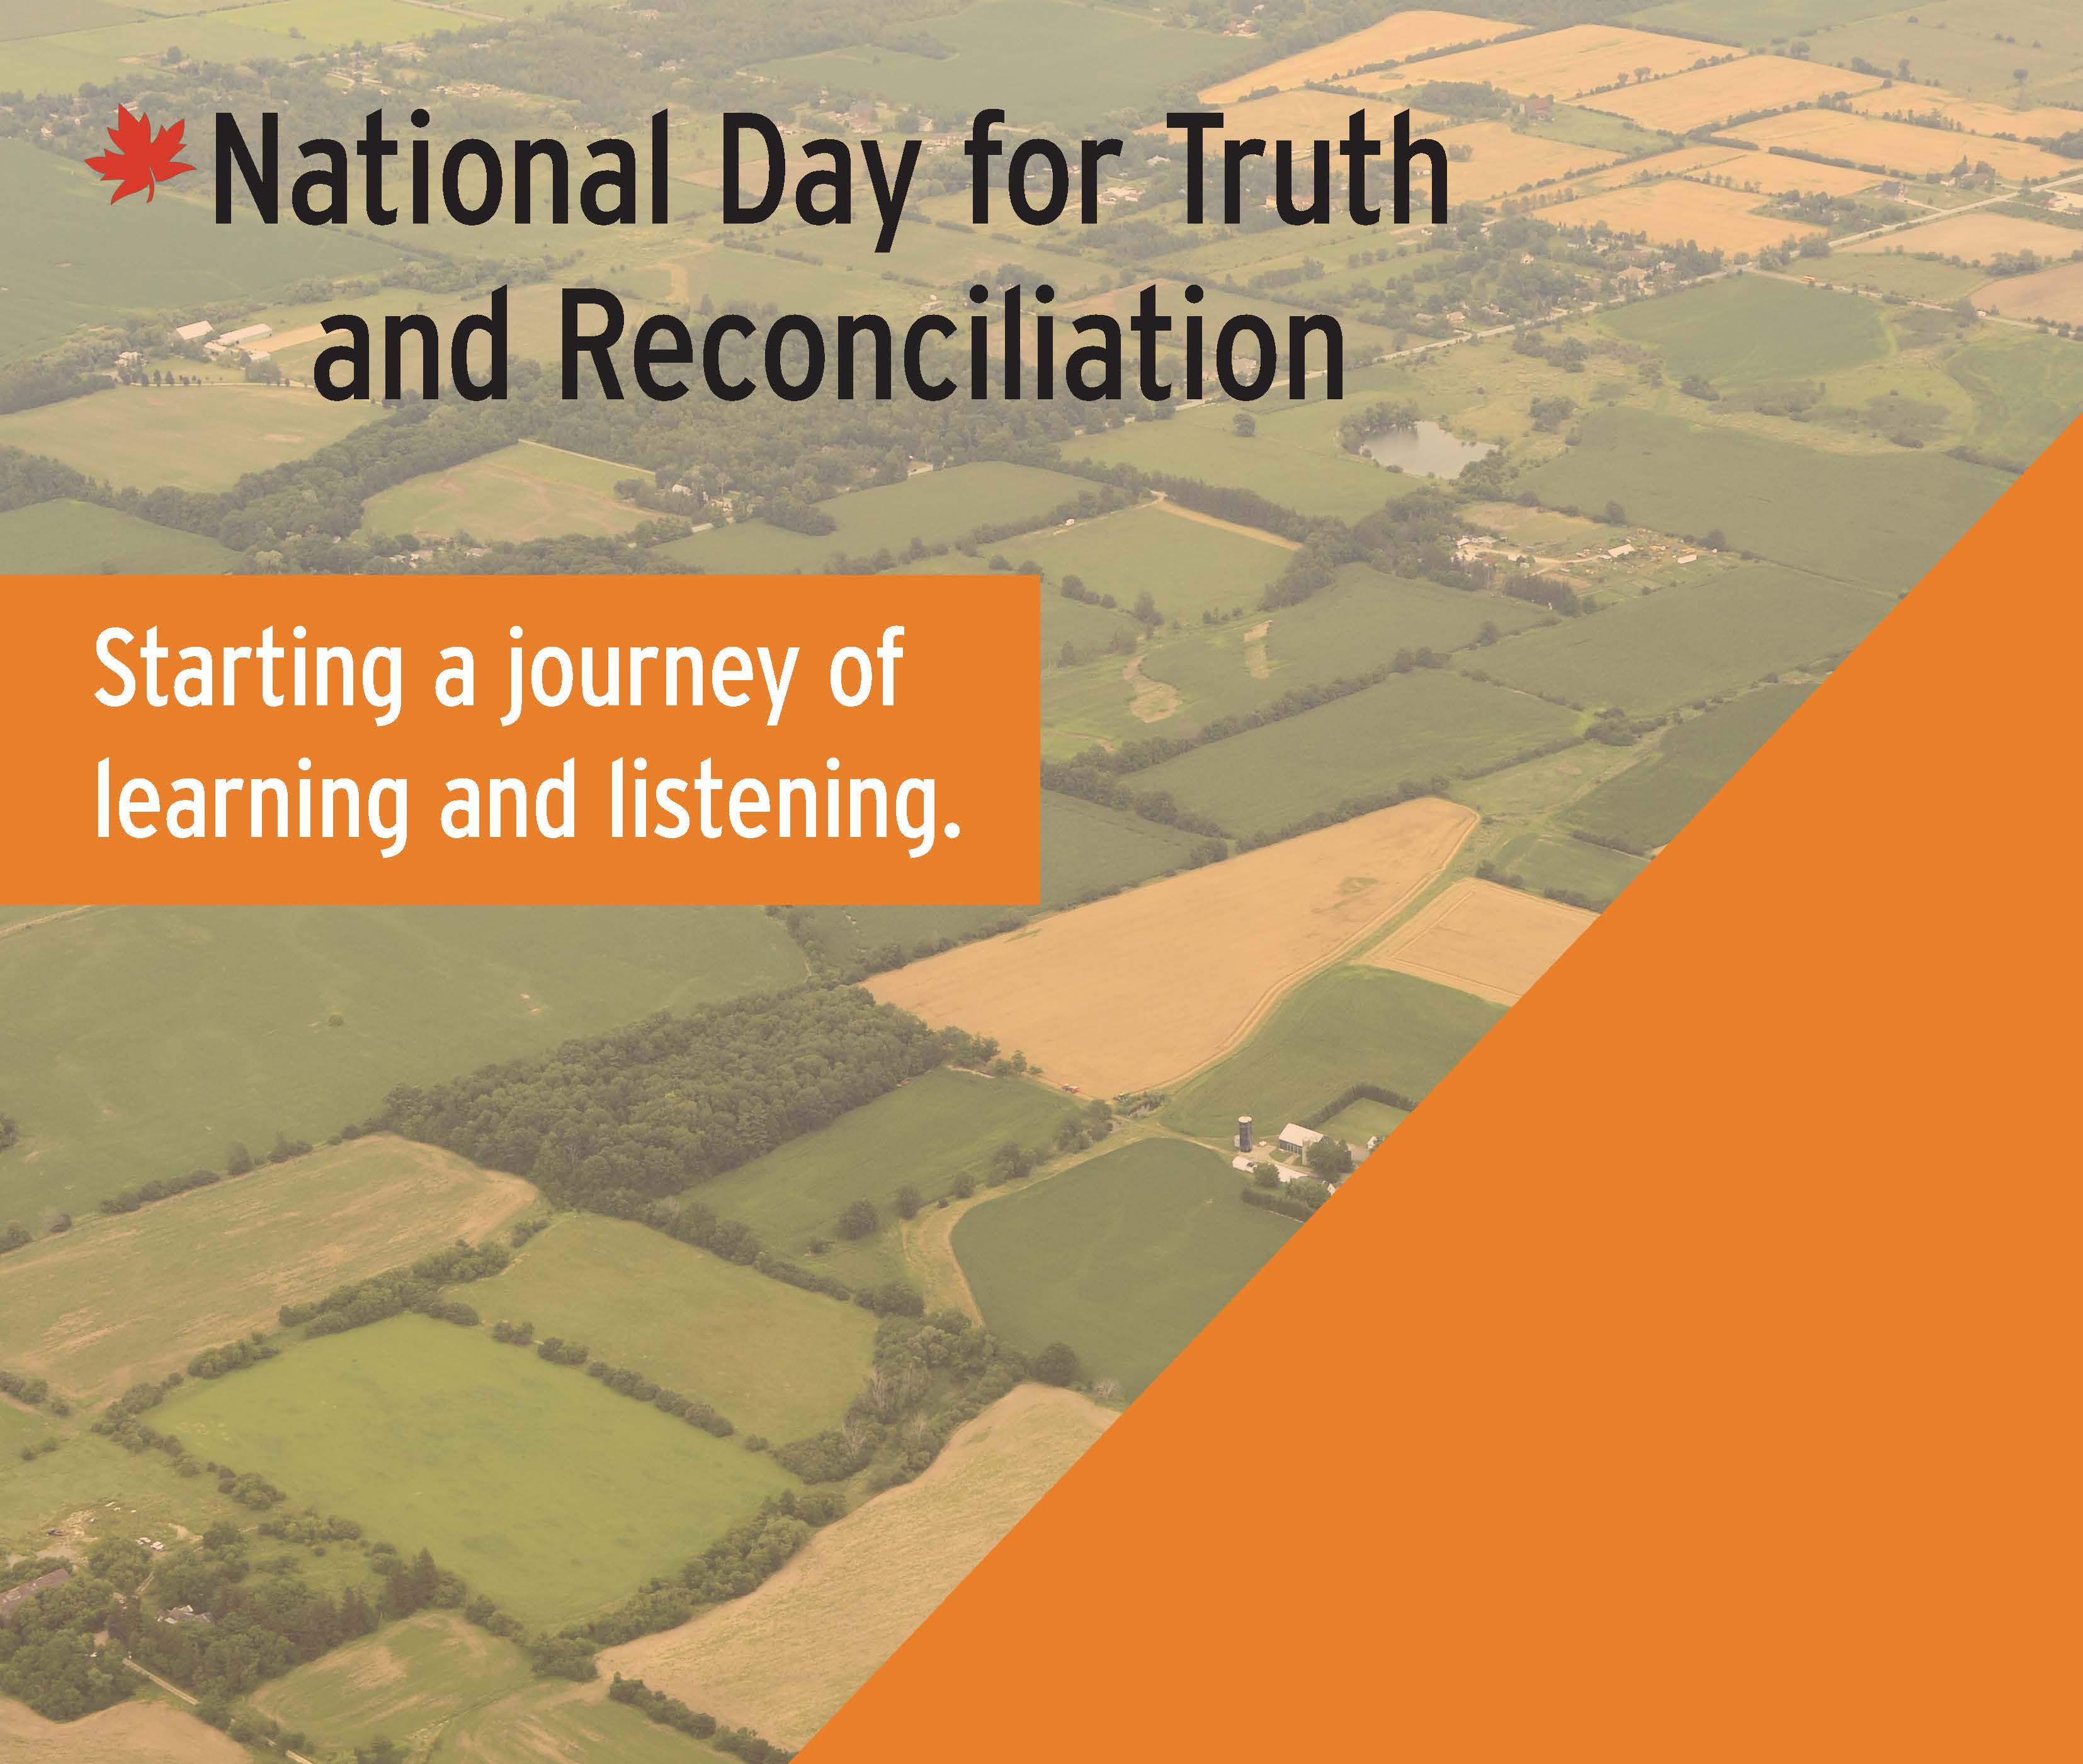 Joint statement recognizing National Day for Truth and Reconciliation